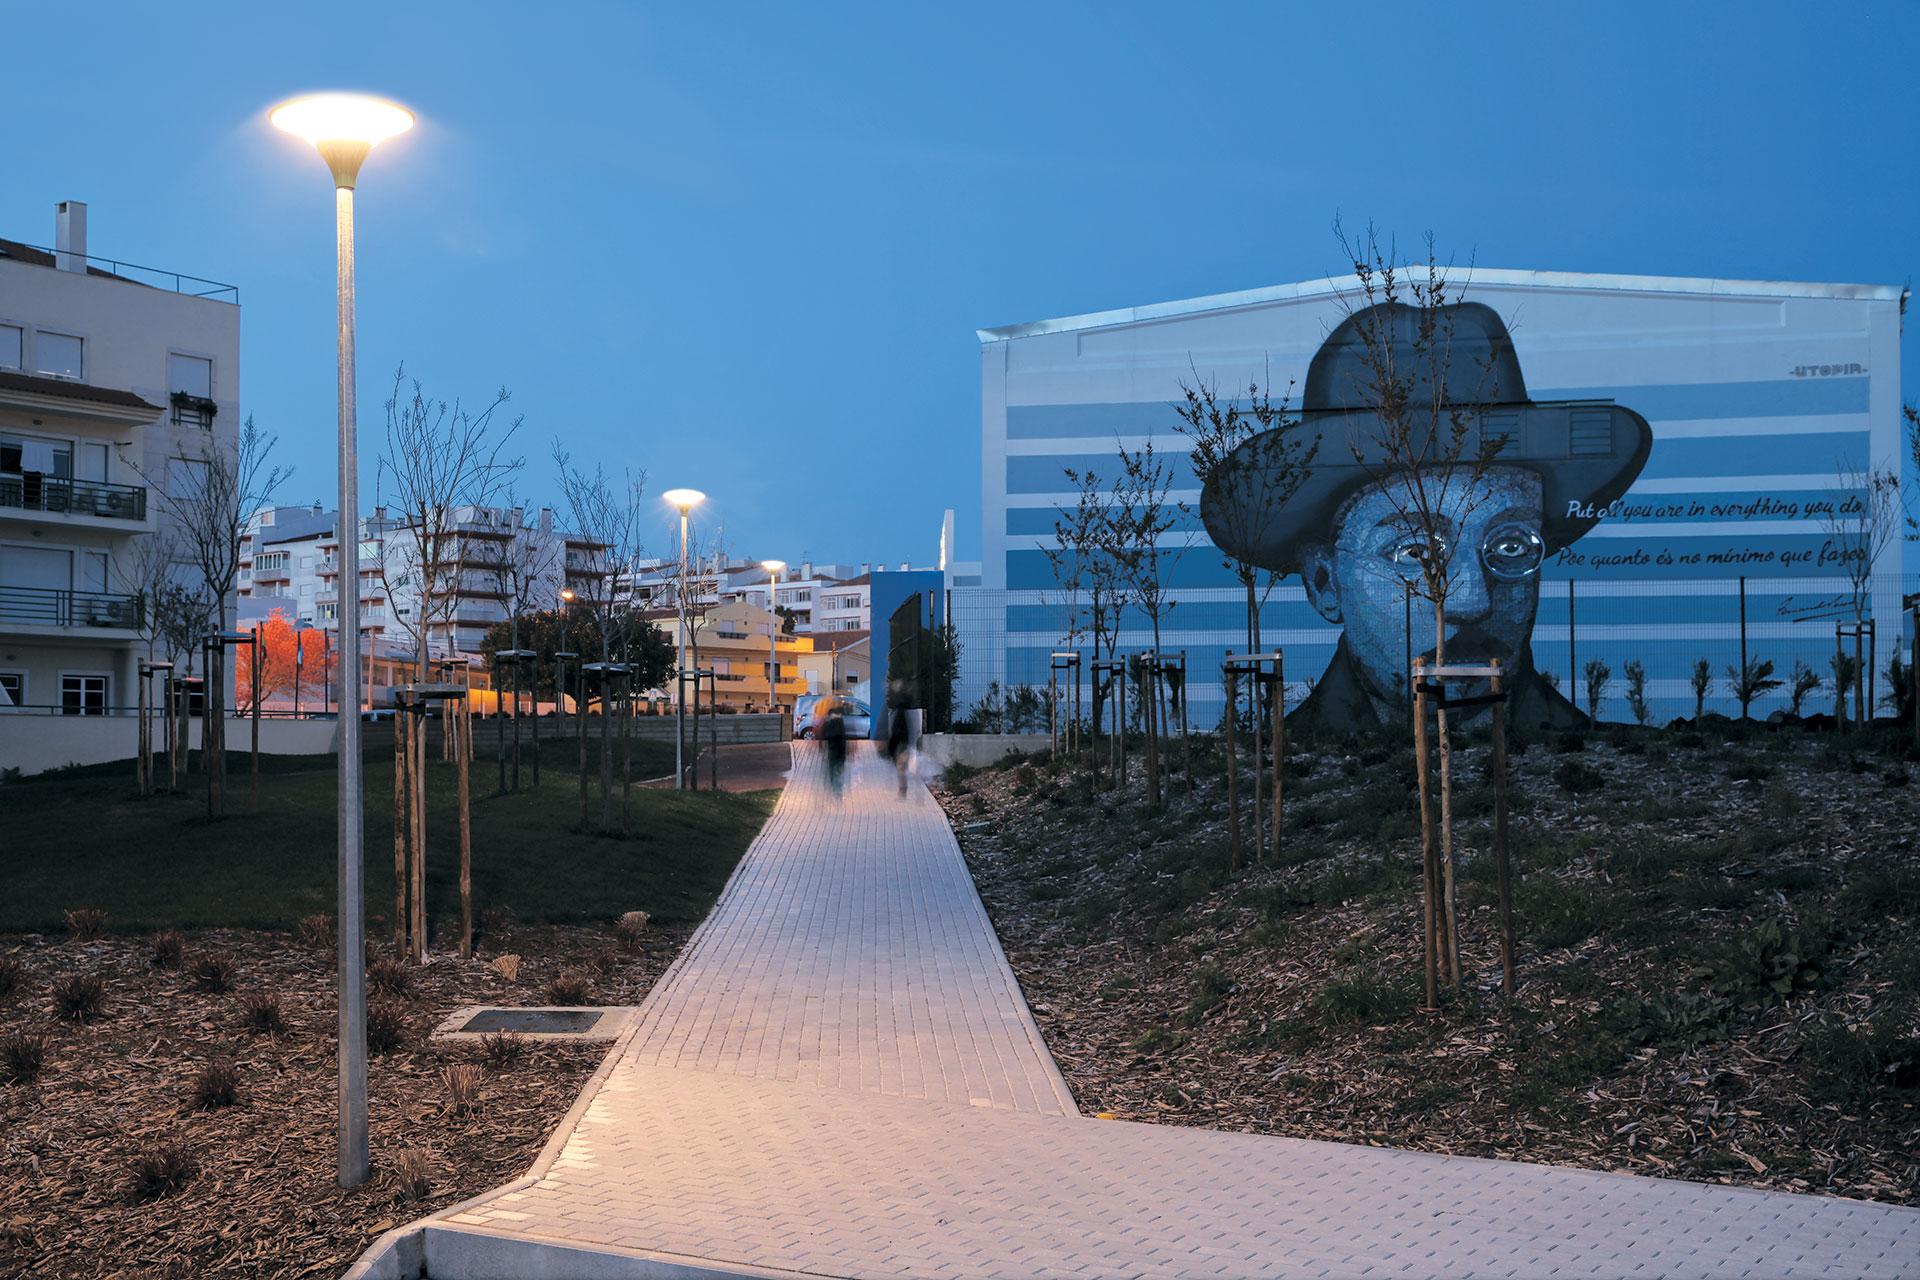 Zela LED luminaire creates warm nocturnal environments so people want to spend time outside at night